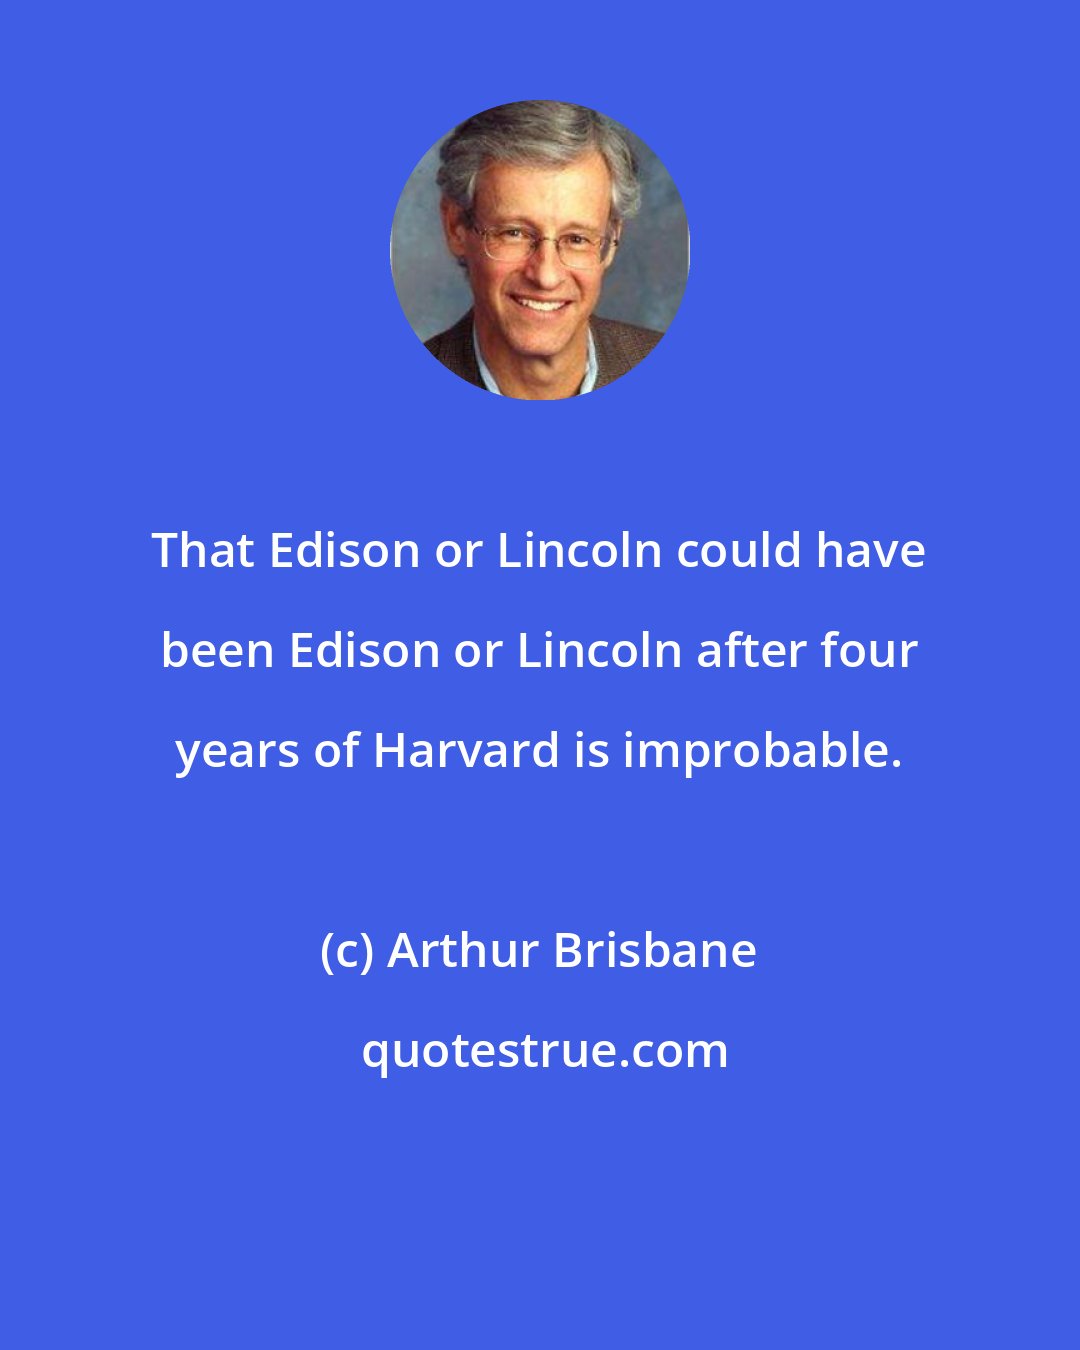 Arthur Brisbane: That Edison or Lincoln could have been Edison or Lincoln after four years of Harvard is improbable.